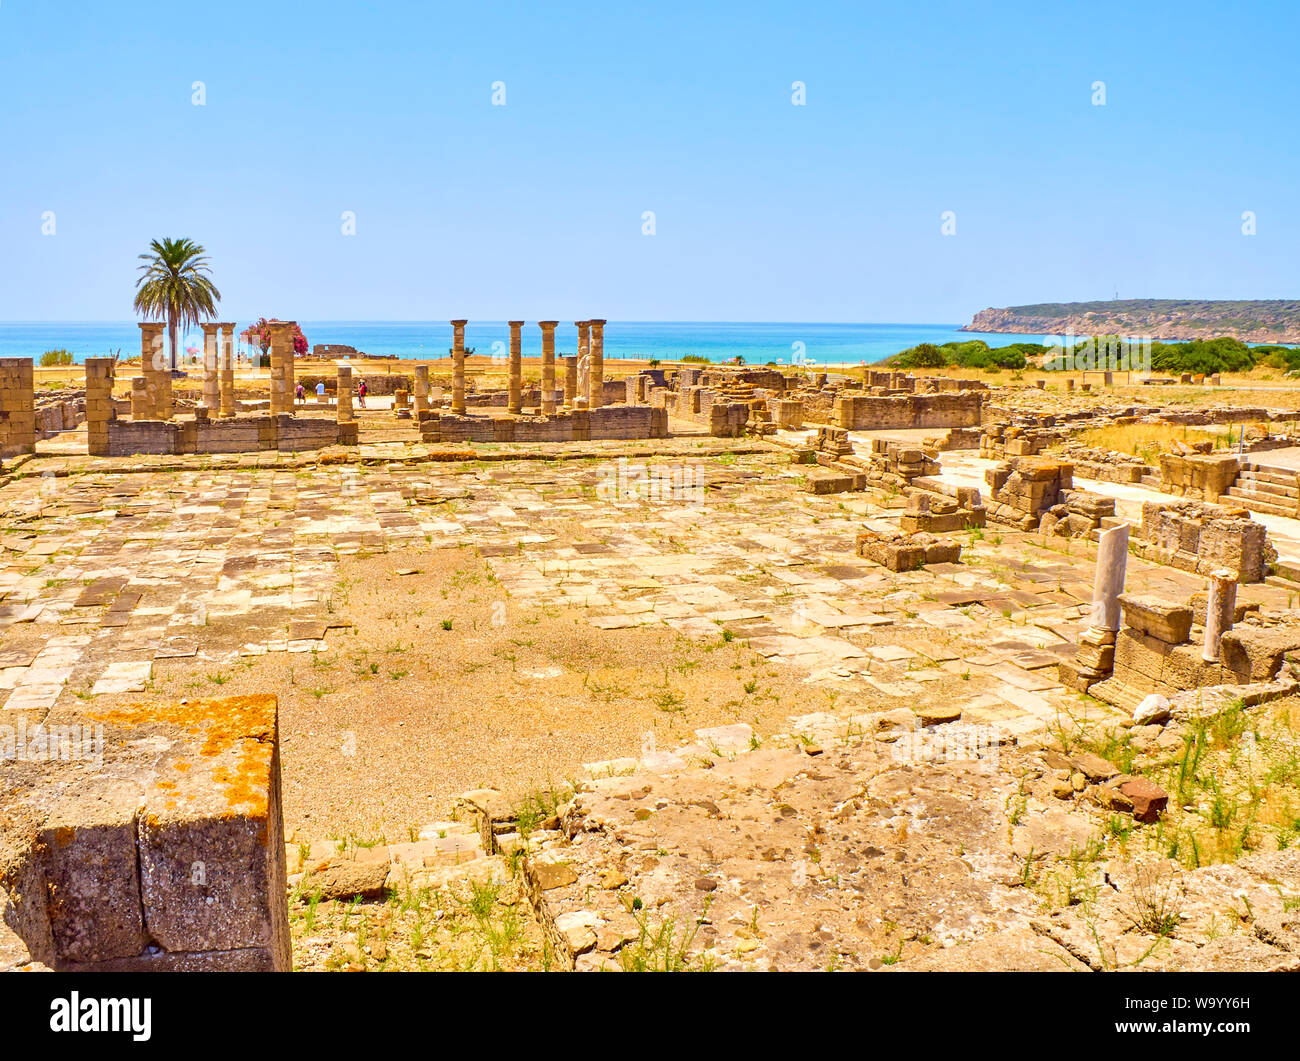 Remains of the Forum Square with the Basilica in the background. Baelo Claudia Archaeological Site. Tarifa, Cadiz. Andalusia, Spain. Stock Photo